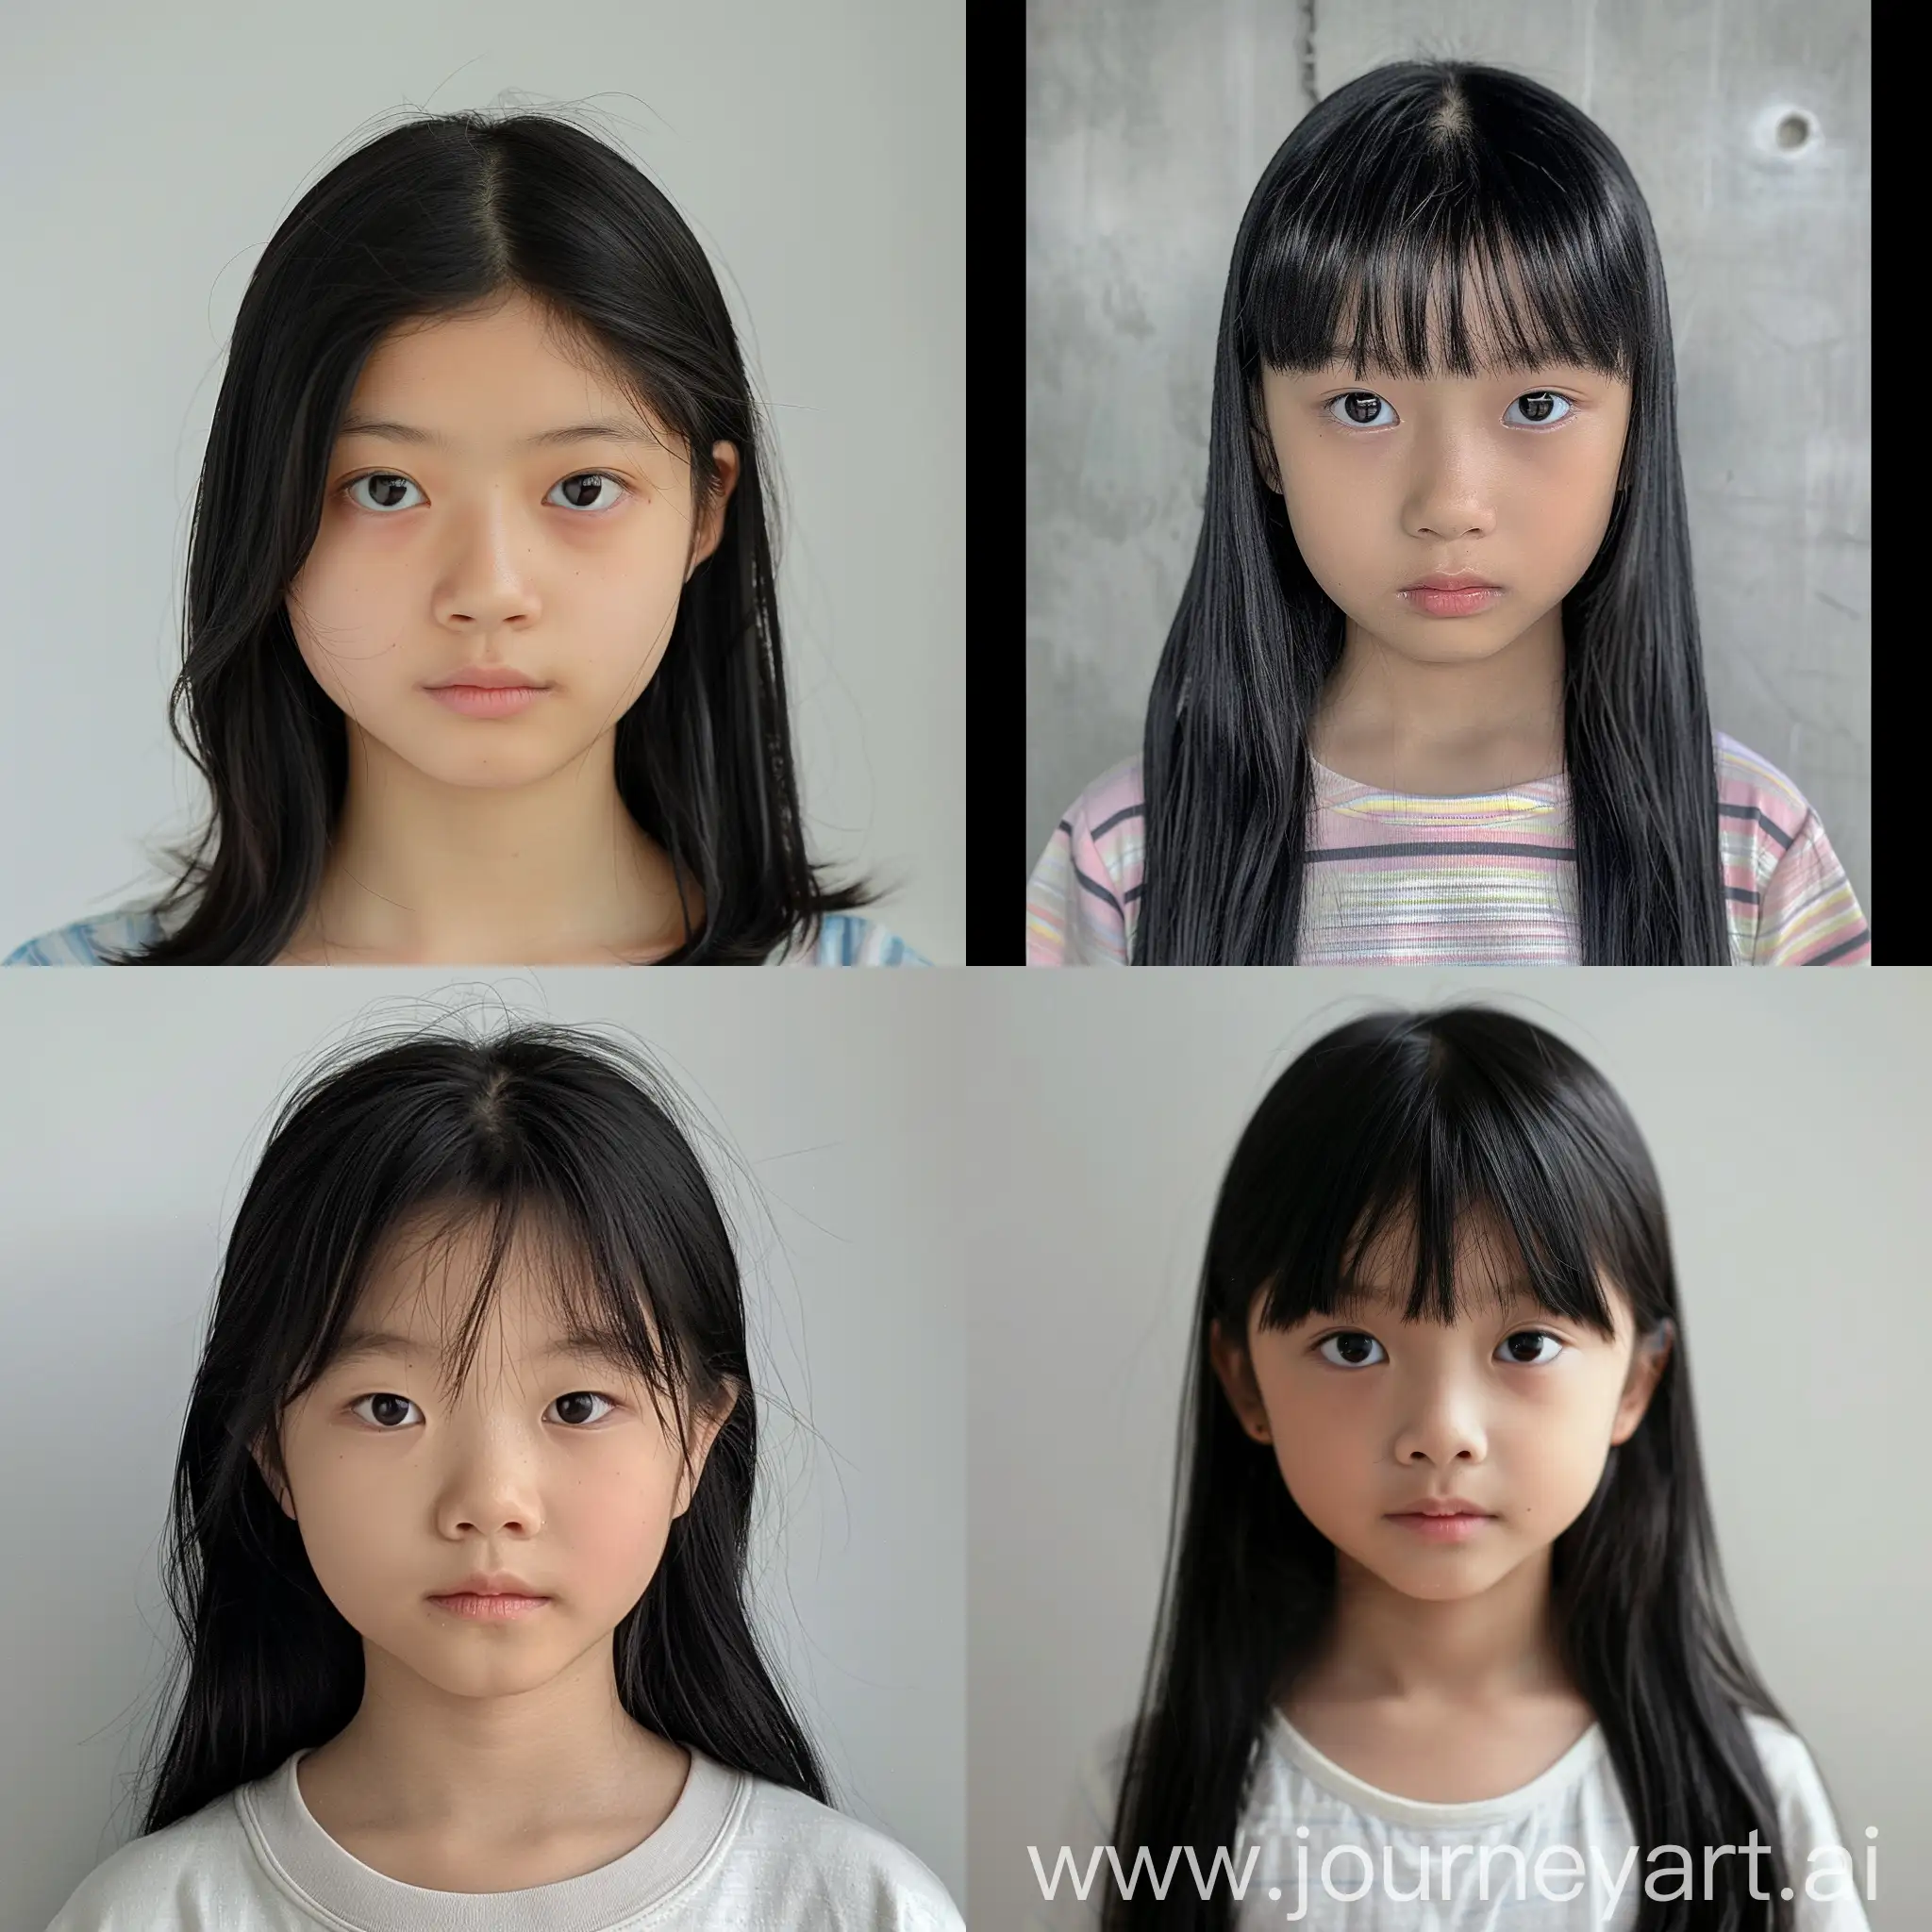 Young-Asian-Woman-with-a-Troubled-Past-and-Neat-Appearance